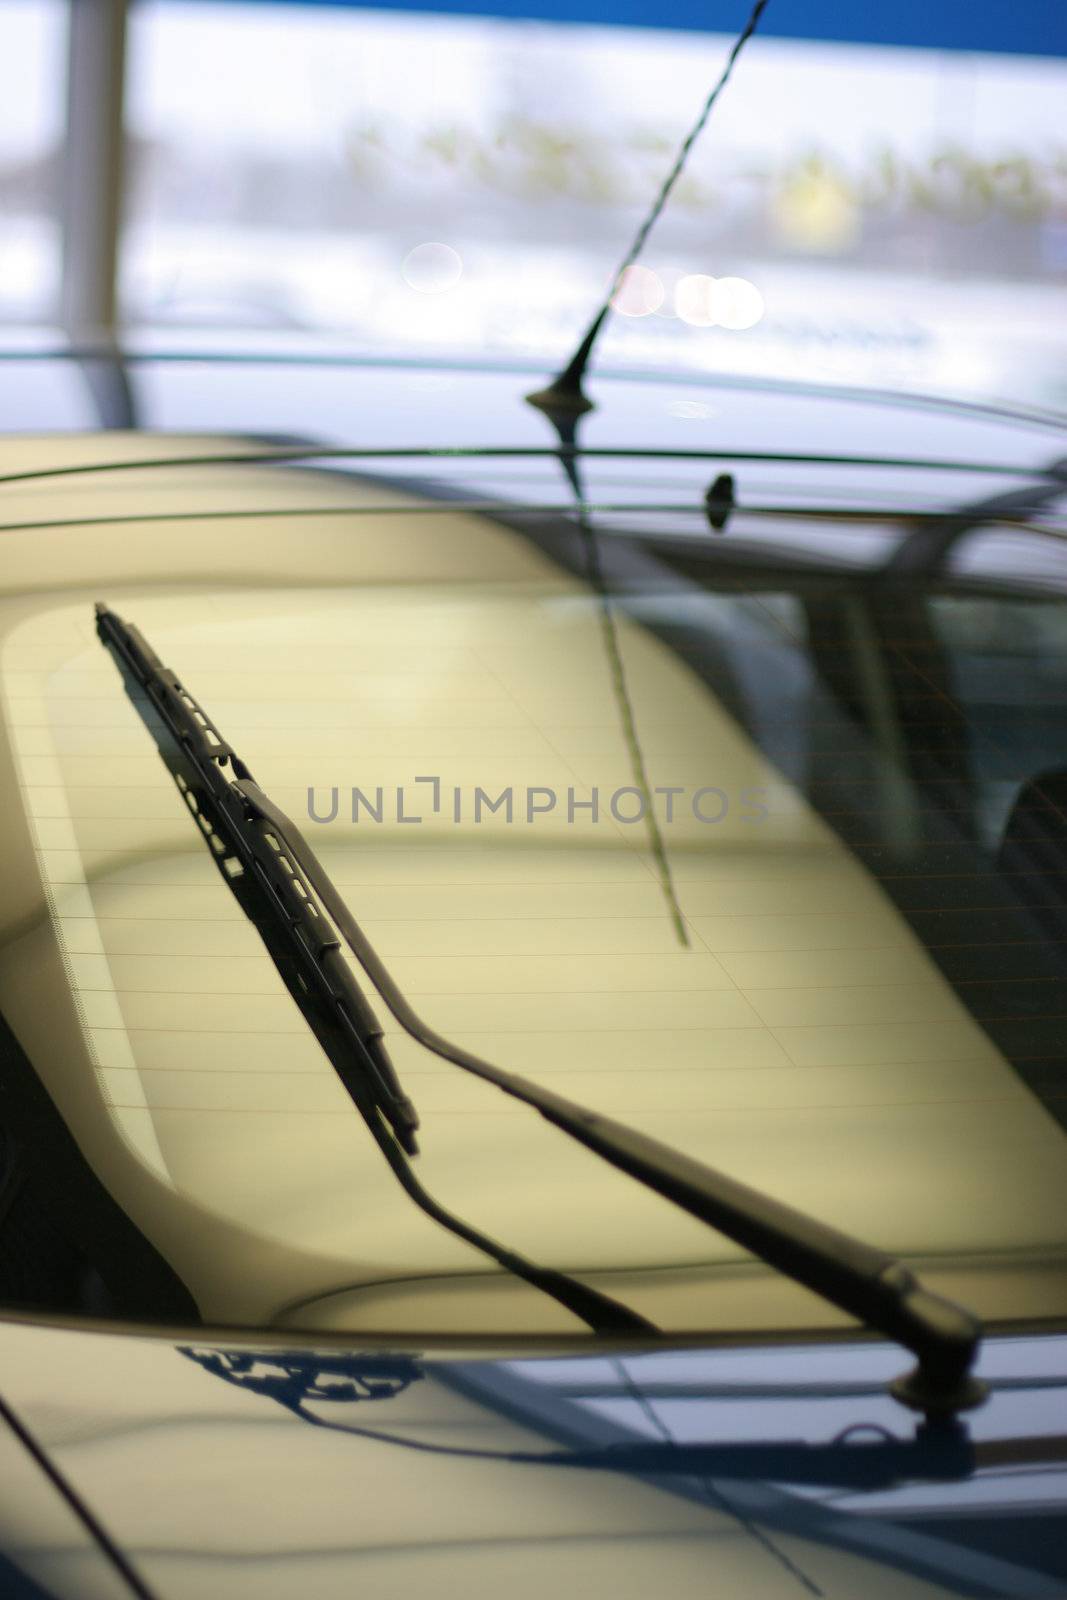 windscreen reflection, selective focus on wiper